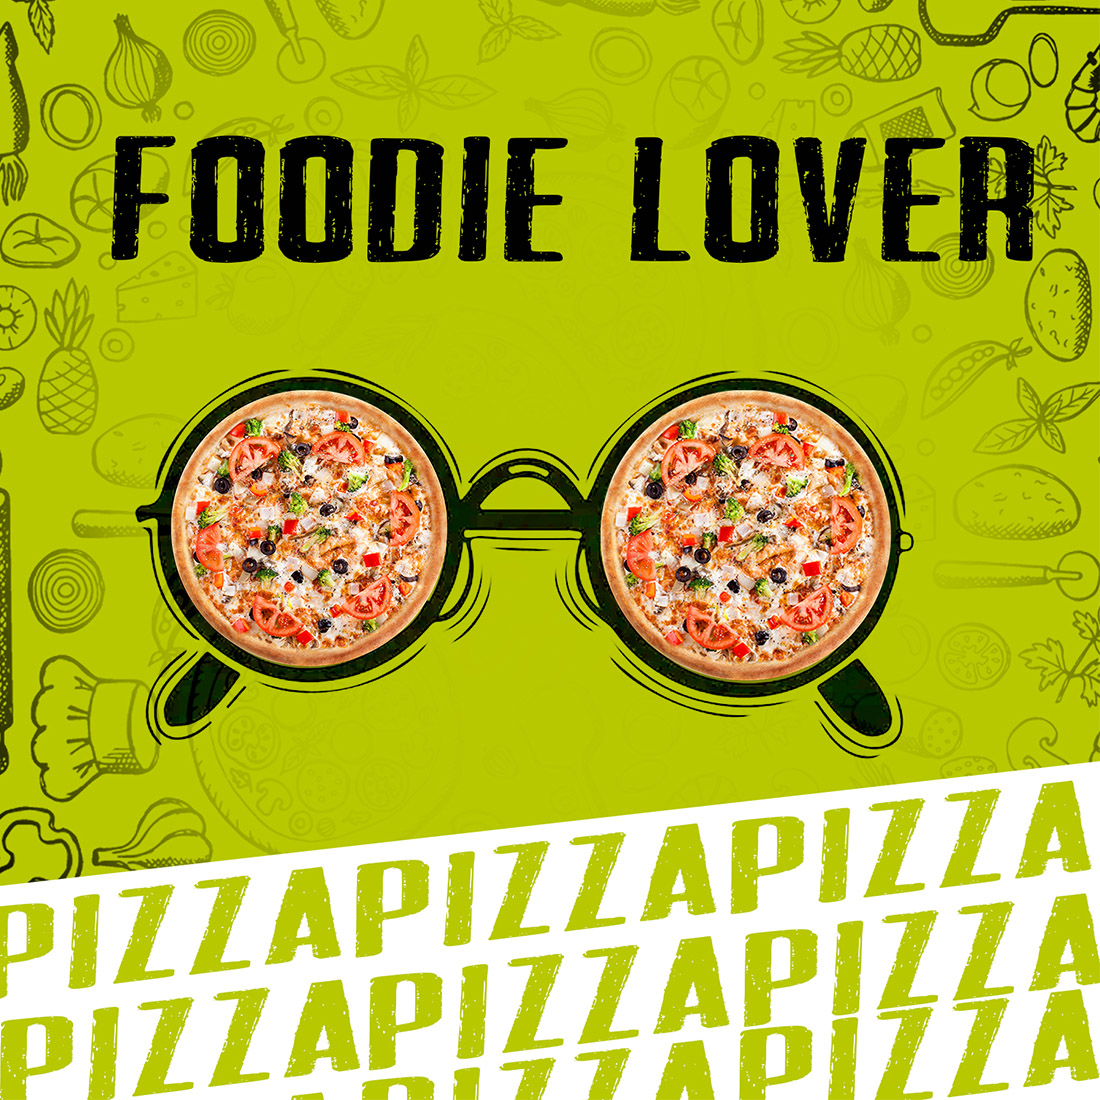 Pizza Vision preview image.